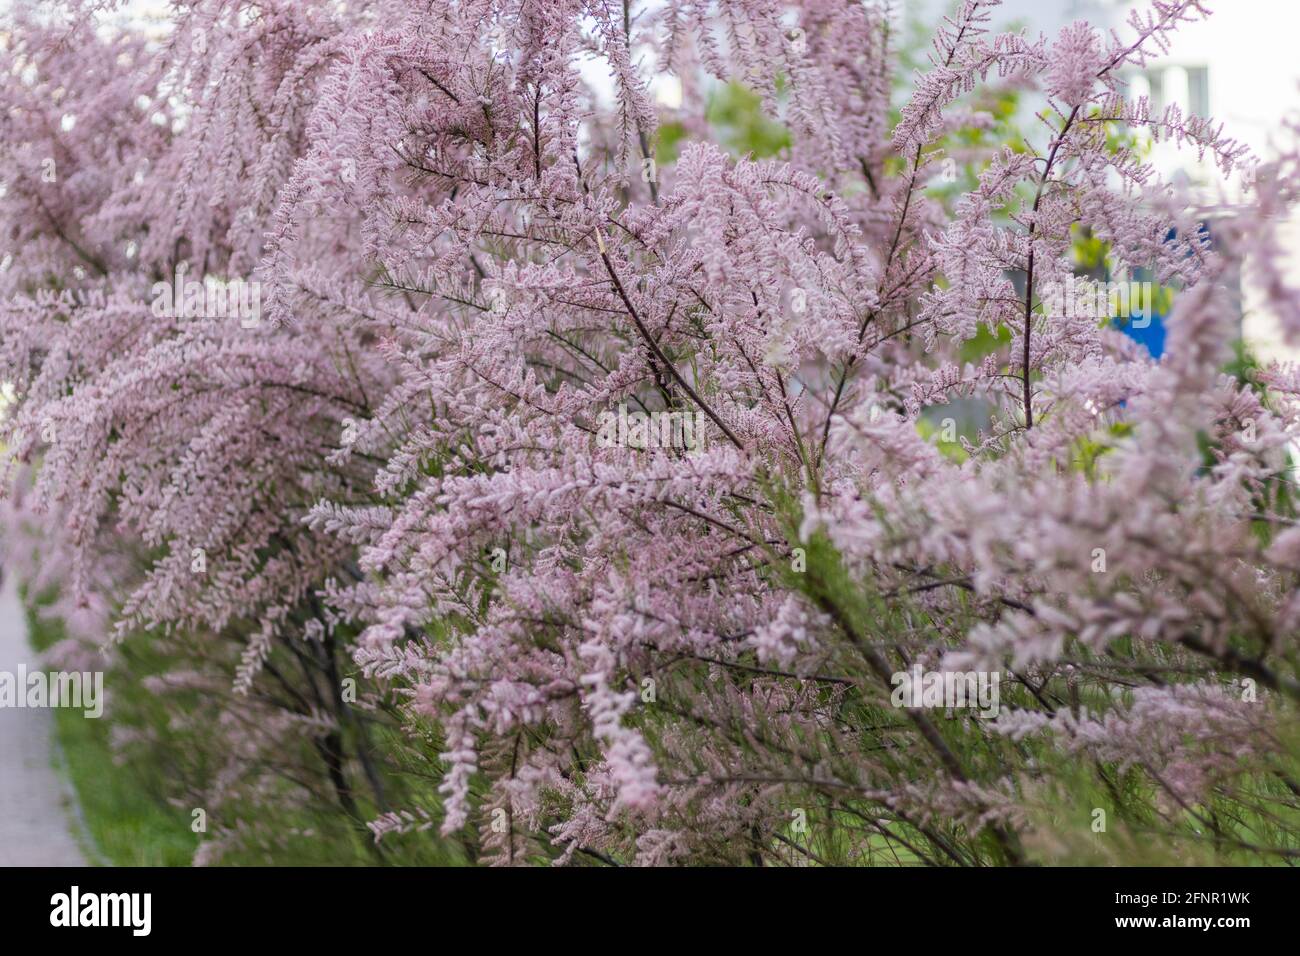 Soft blooming Tamarisk or salt cedar green plant with pink flowers Stock Photo